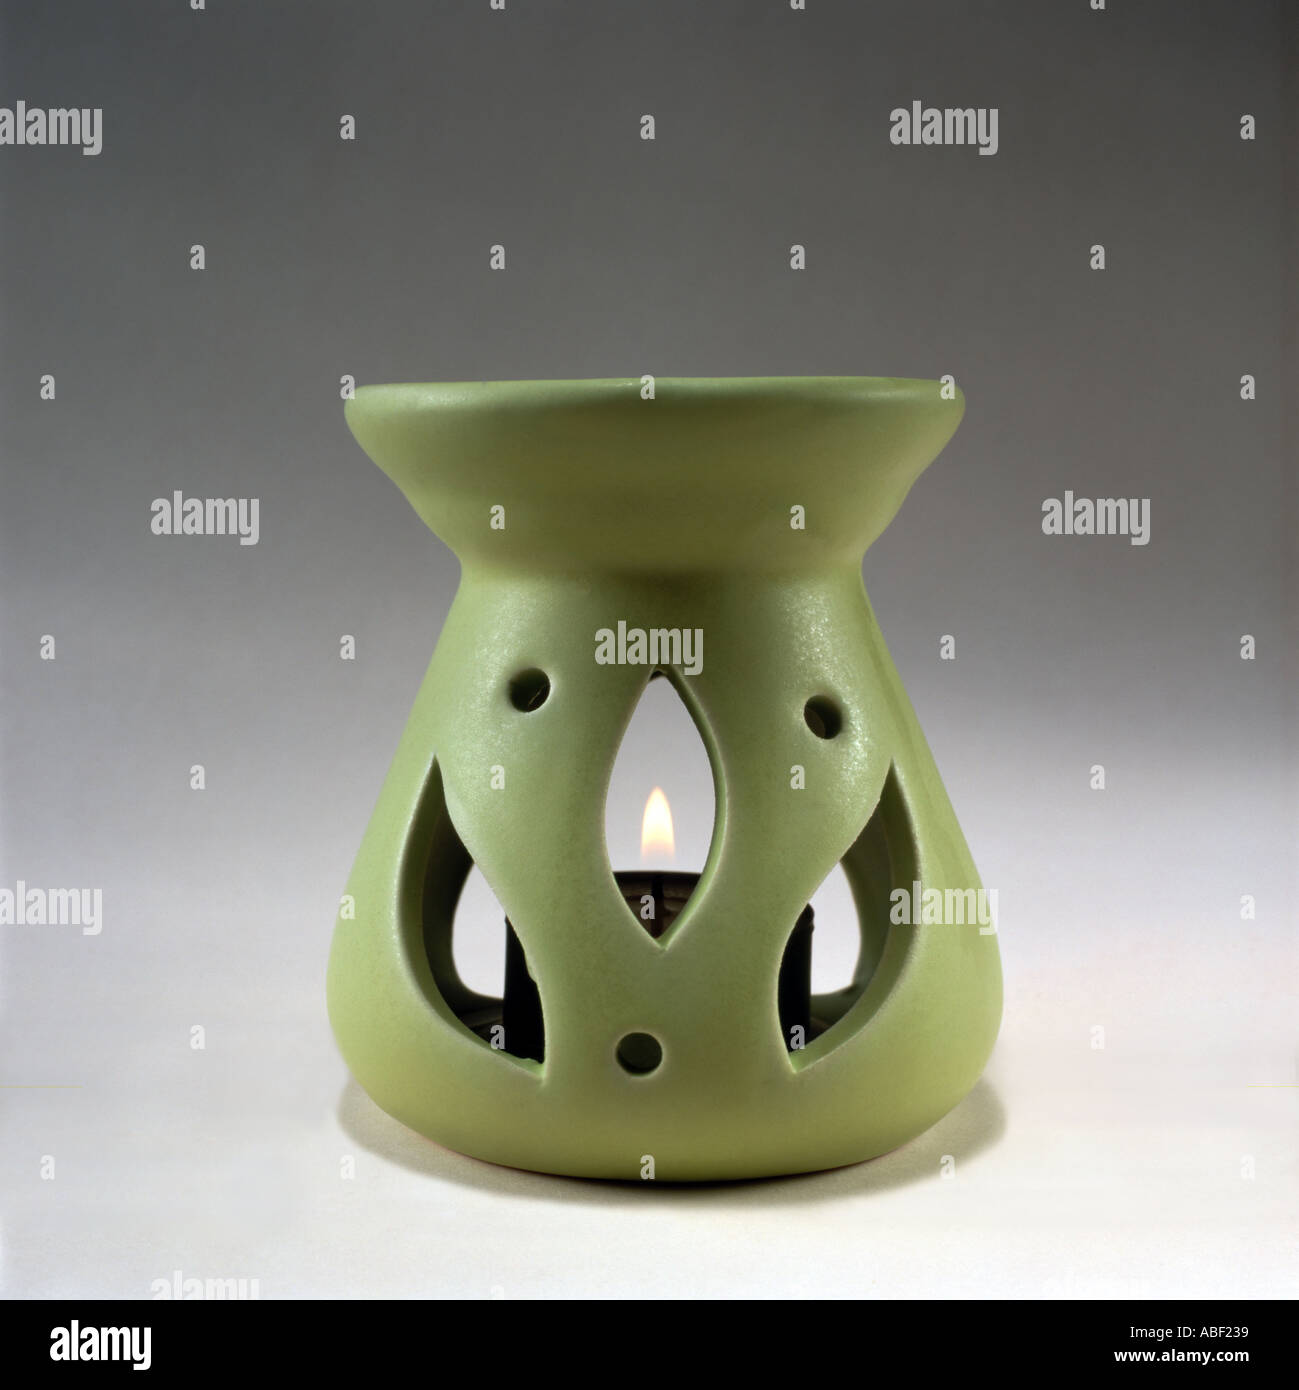 Oil Burner on a grey background with a lit 'tea light' candle Stock Photo